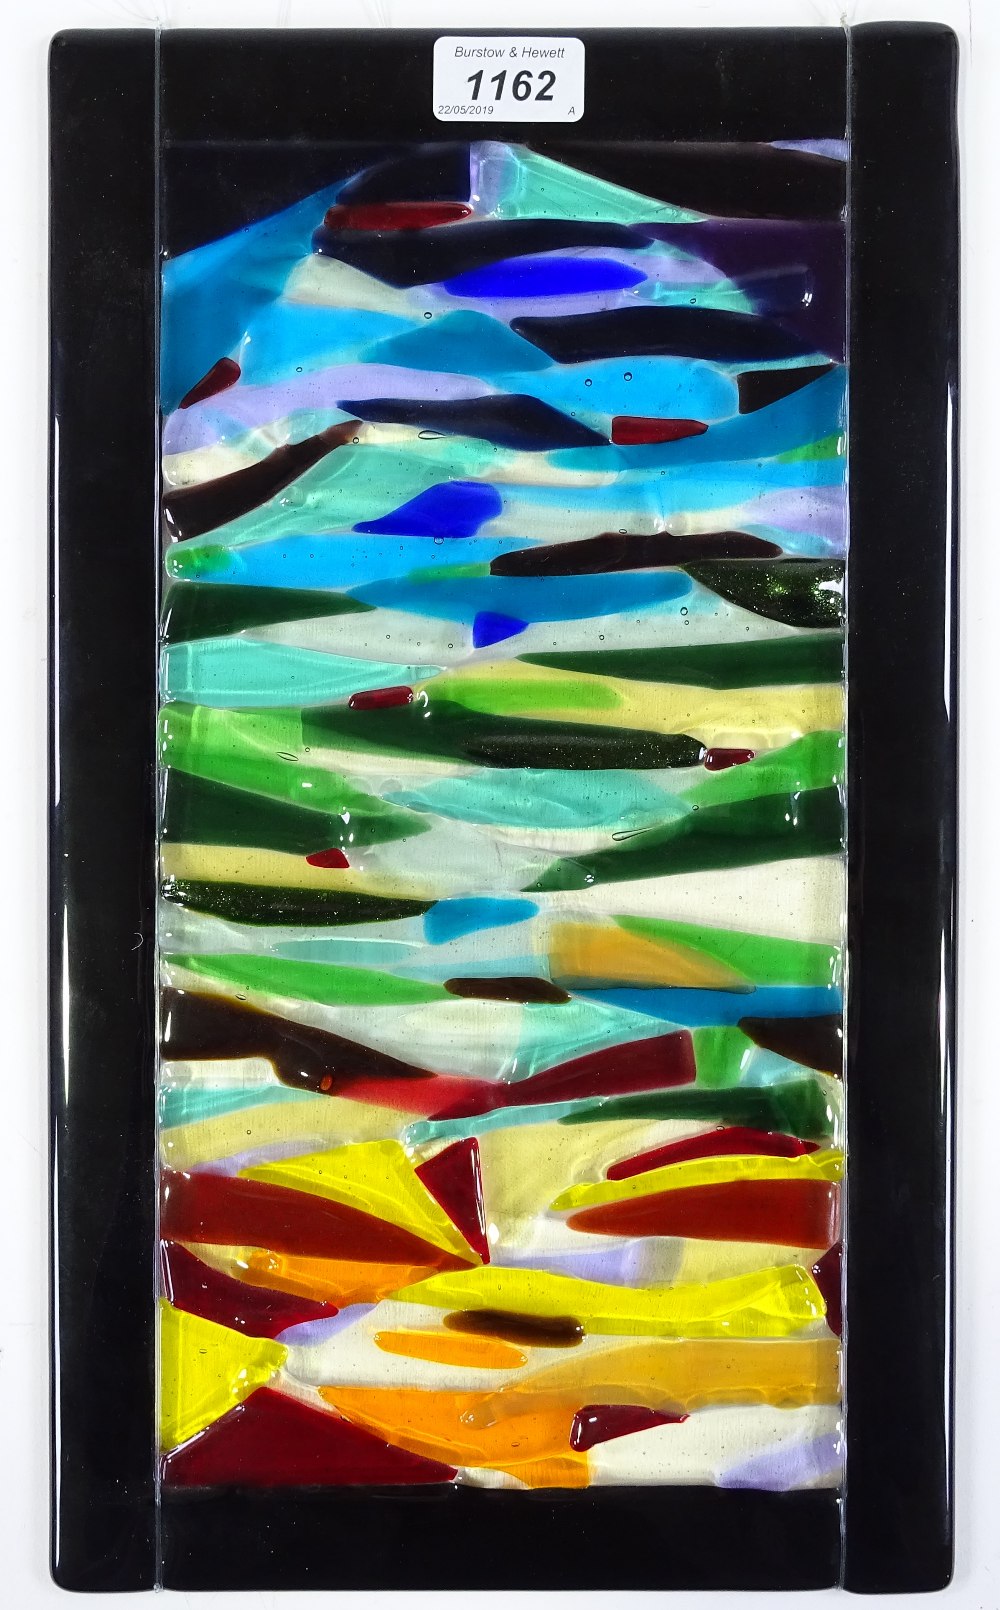 Studio coloured glass hanging sculpture, abstract composition, unsigned, 16" x 9"